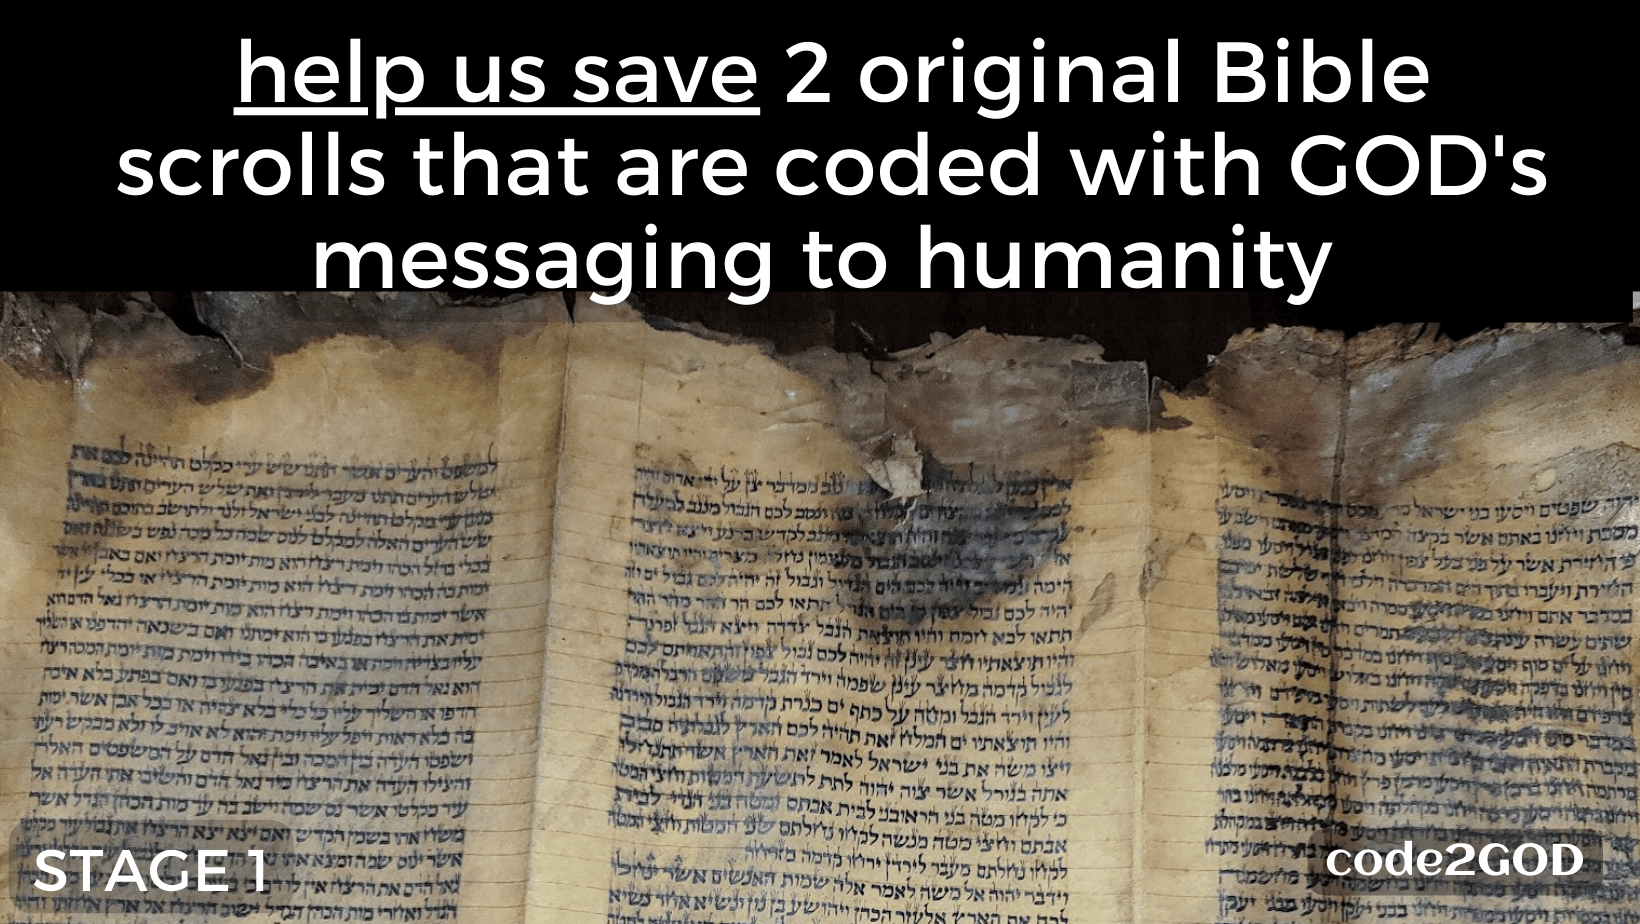 help us save 2 original Bible scrolls that are coded with GOD's messaging to humanity